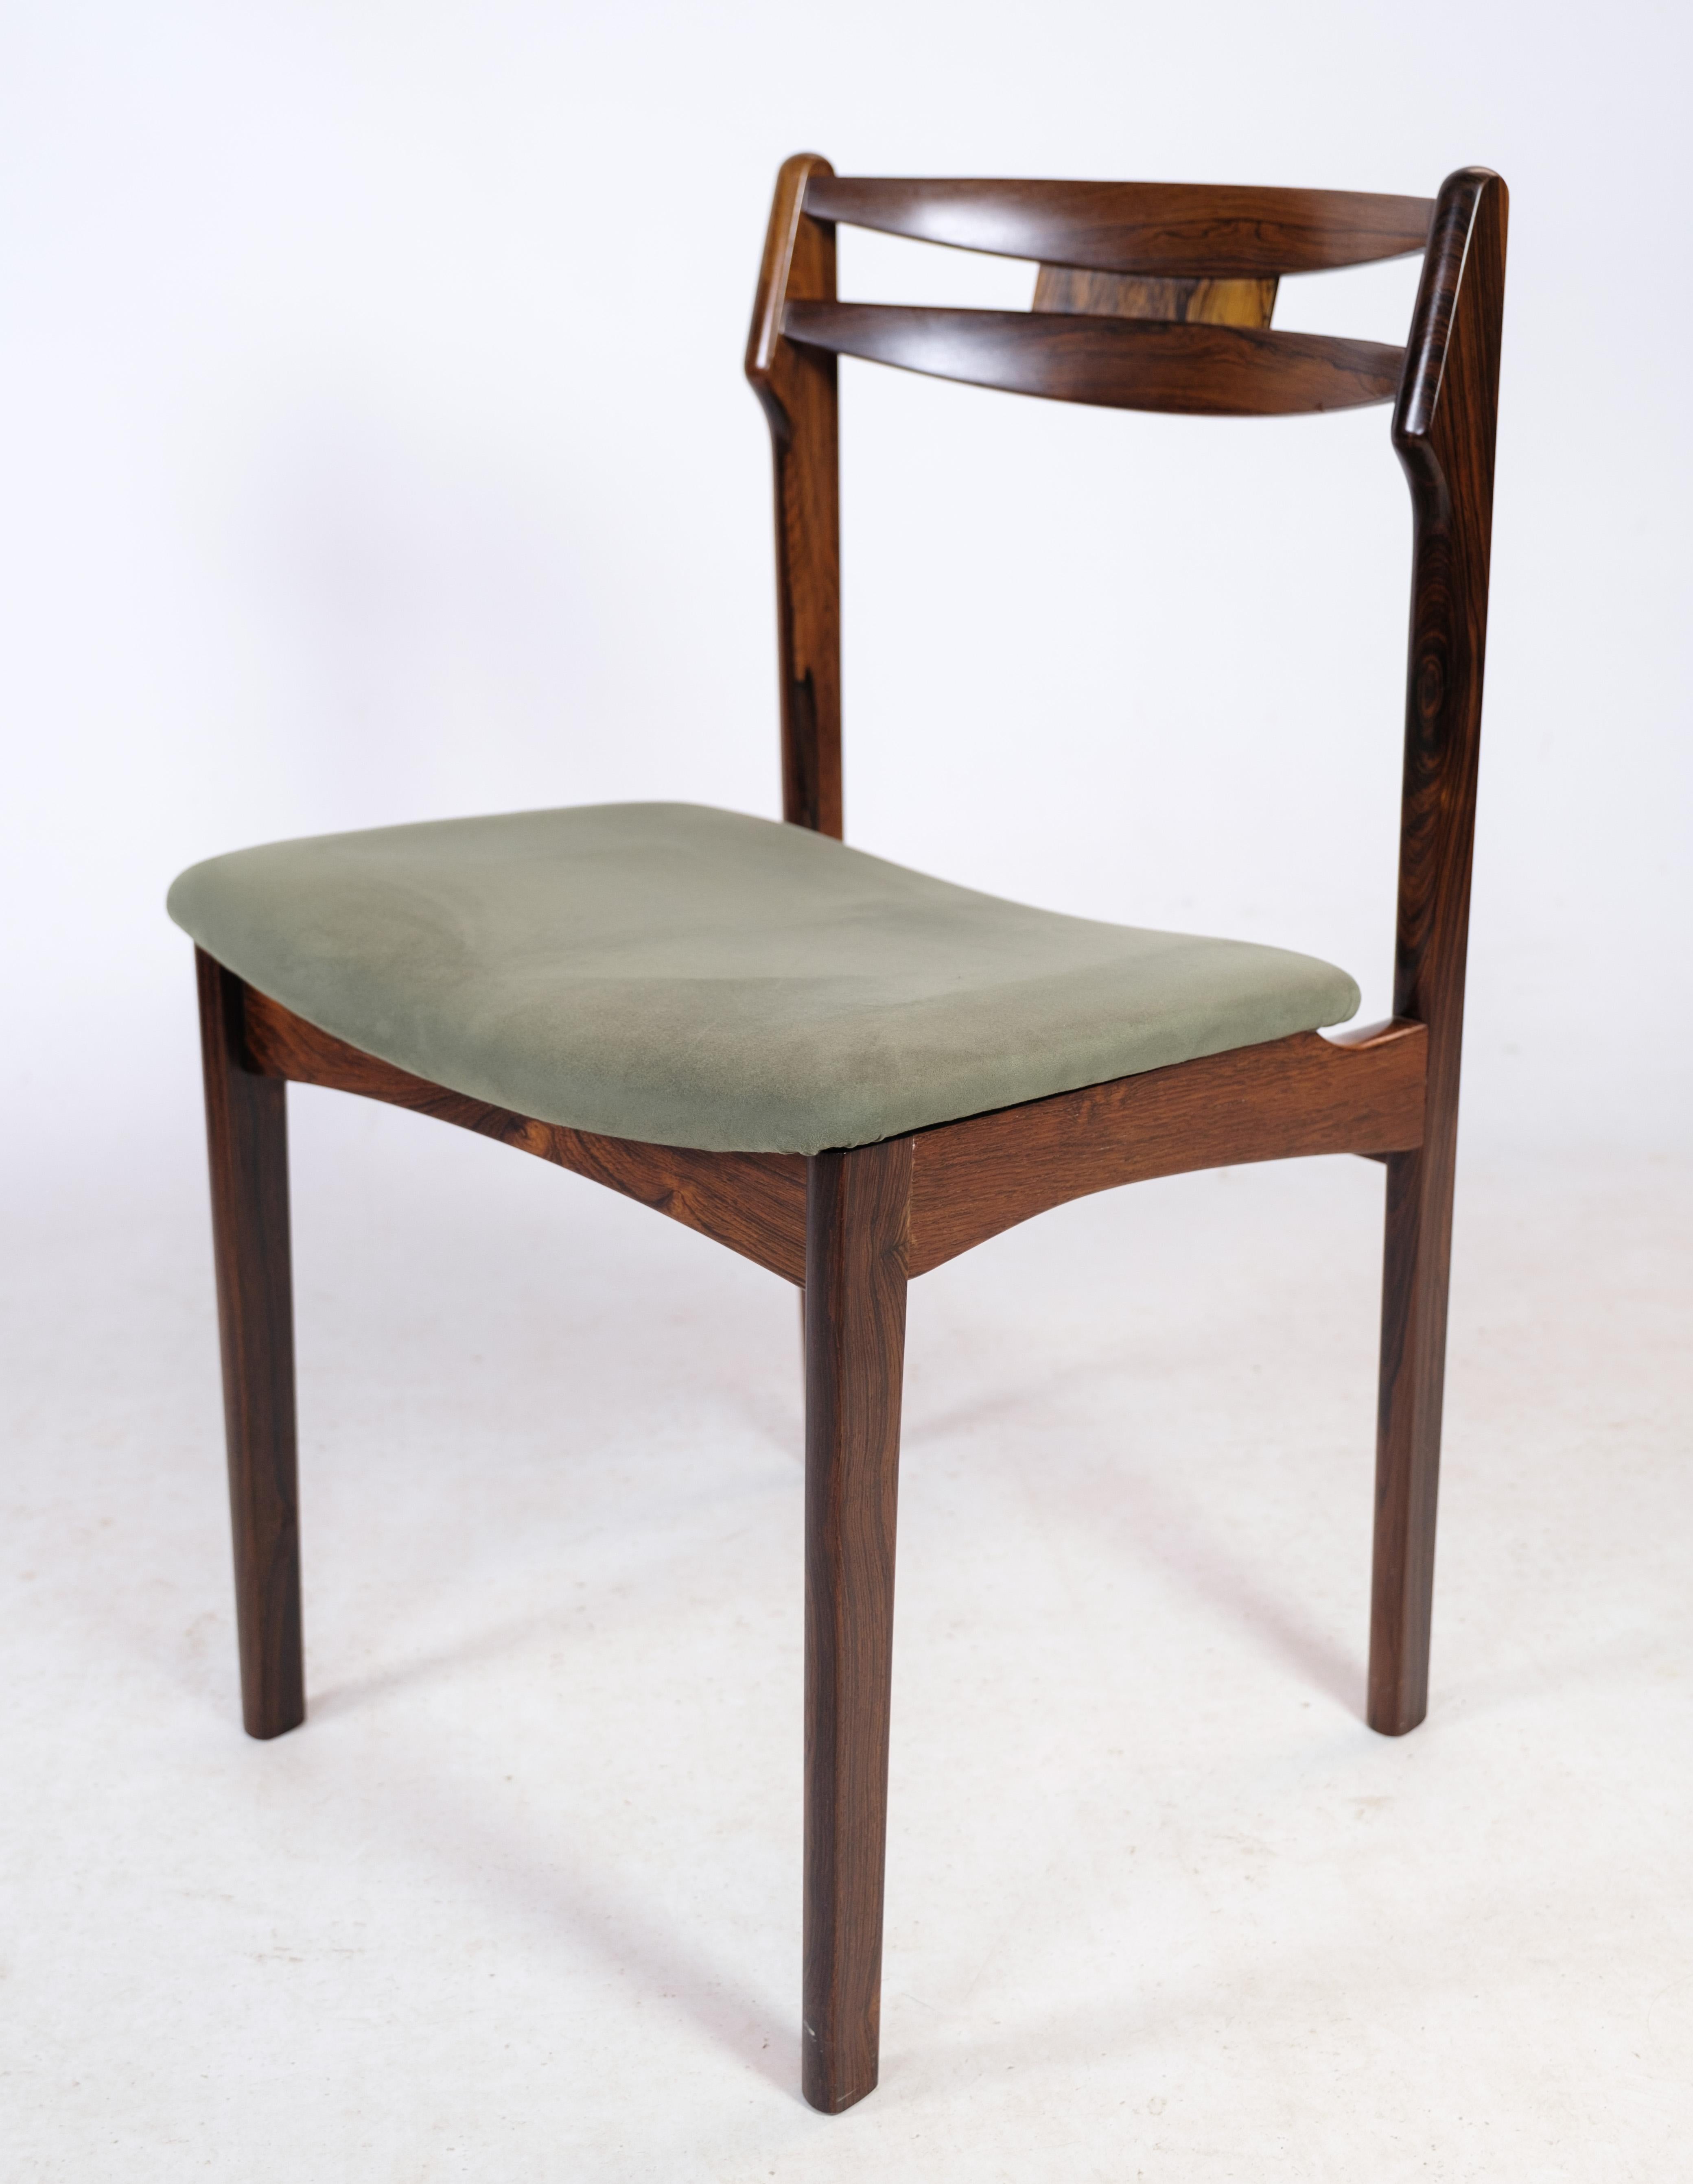 Set of 6 (We have 12) rosewood dining chairs with green fabric from around the 1960s. A set of chairs of high quality and craftsmanship. They are all in very good condition in both fabric and wood. Rarely offered.
Measurements in cm: H:77 W:47 D:44